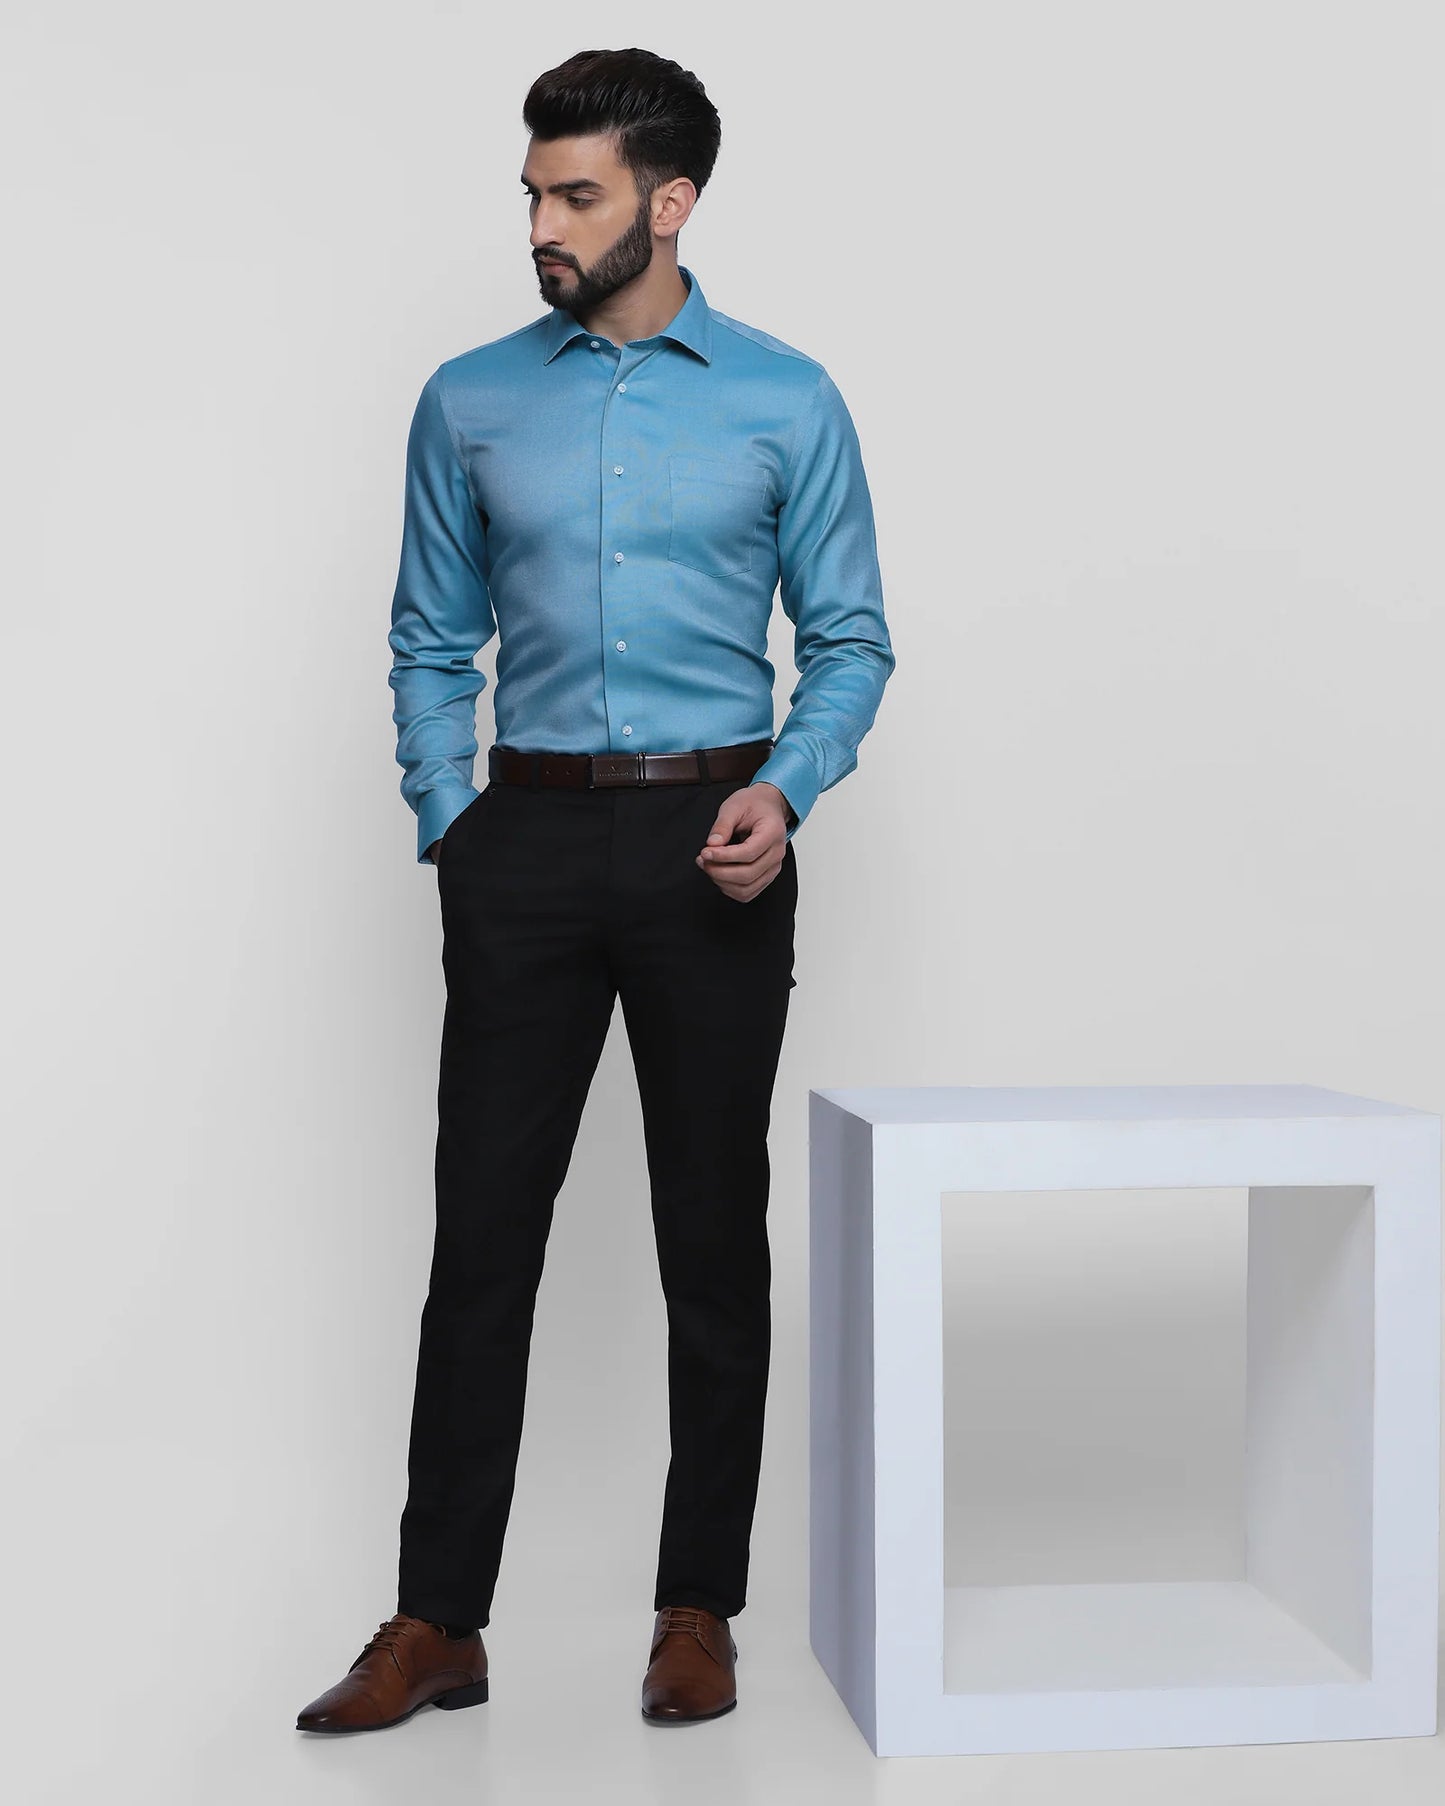 Solid formal shirt in peacock blue